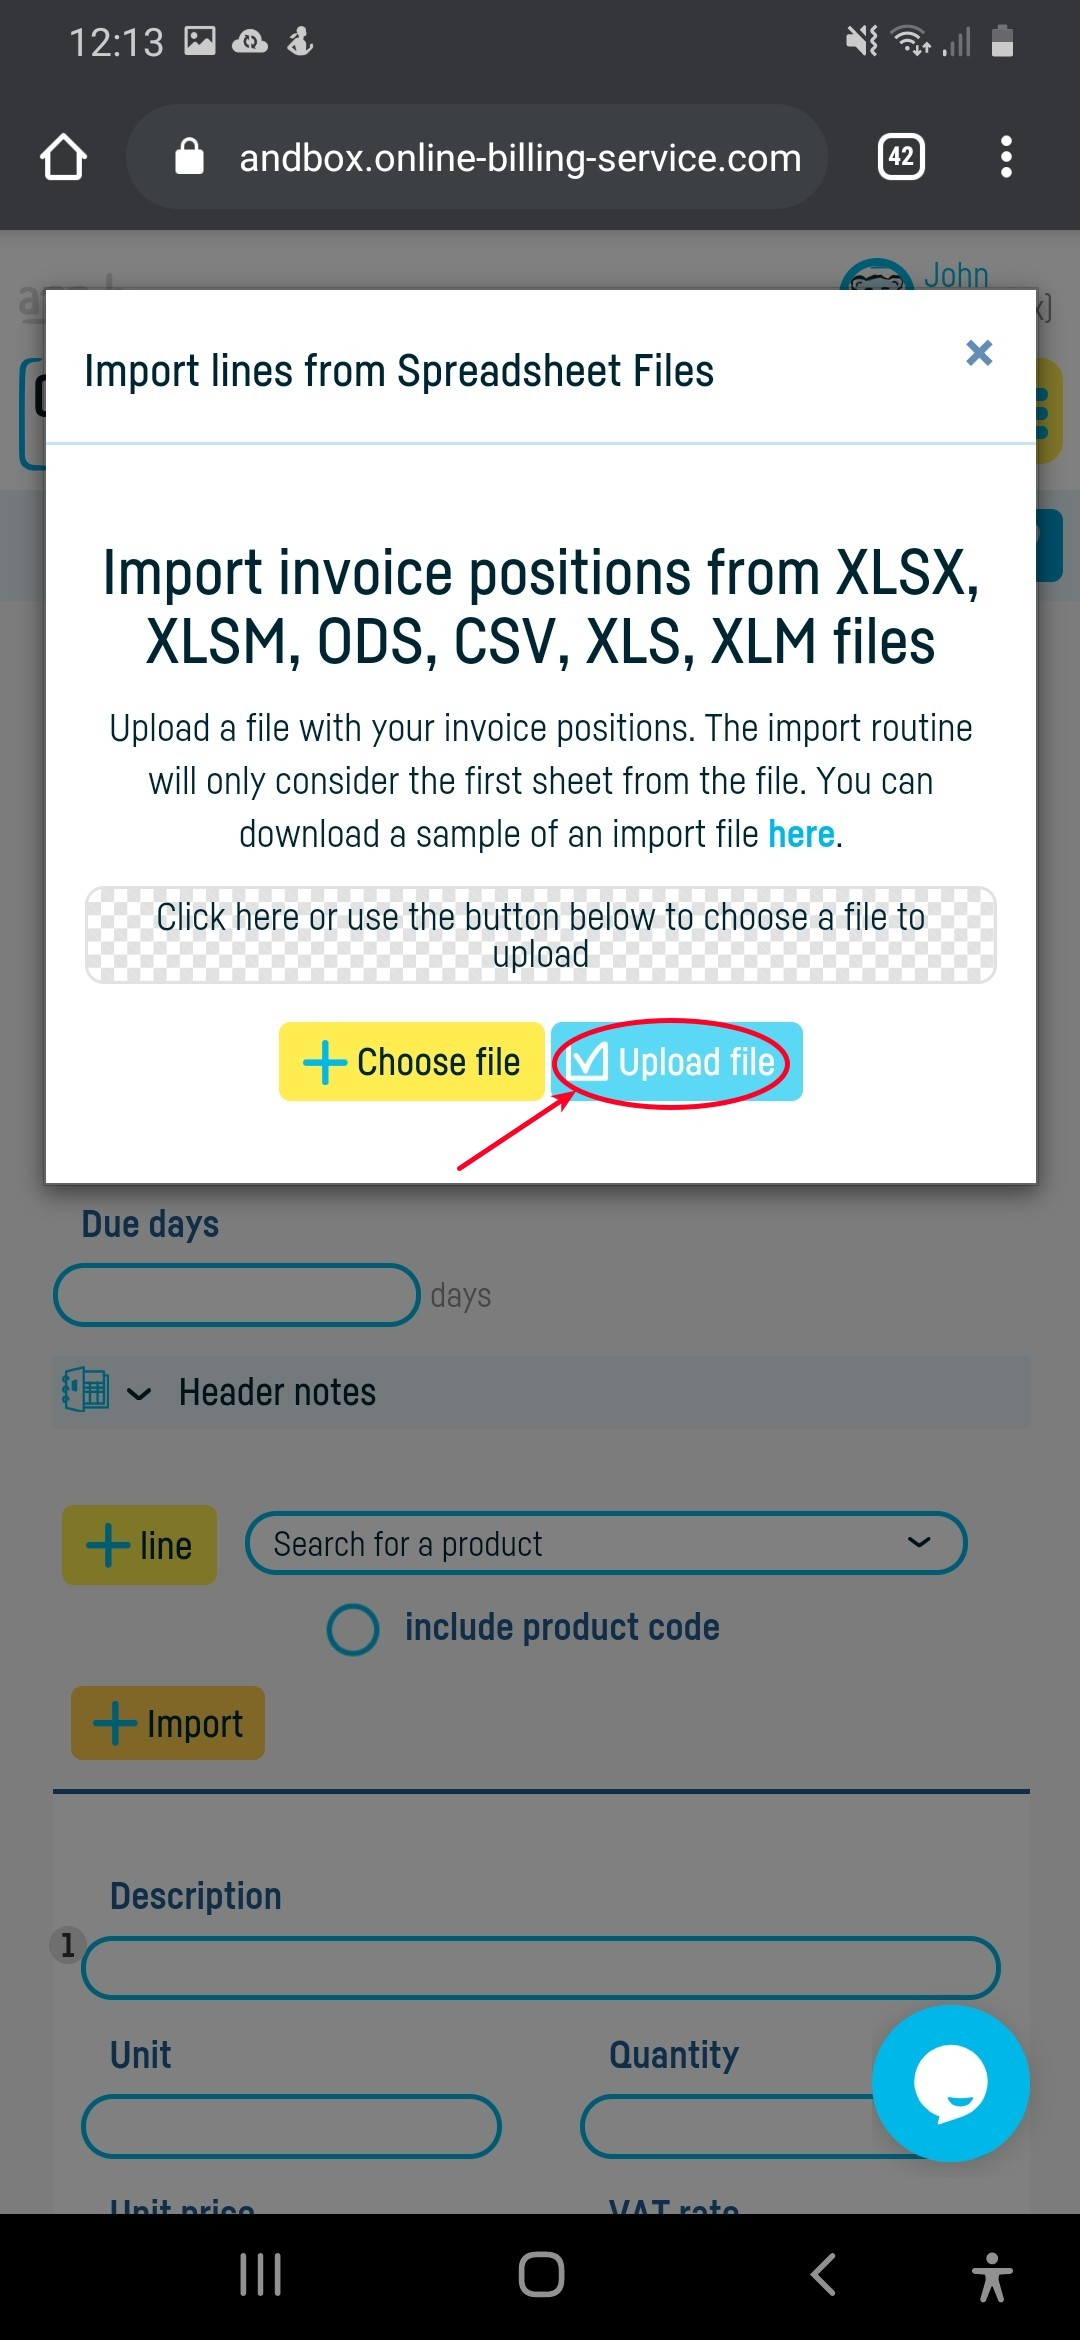 Import lines from documents into your invoice - step 3